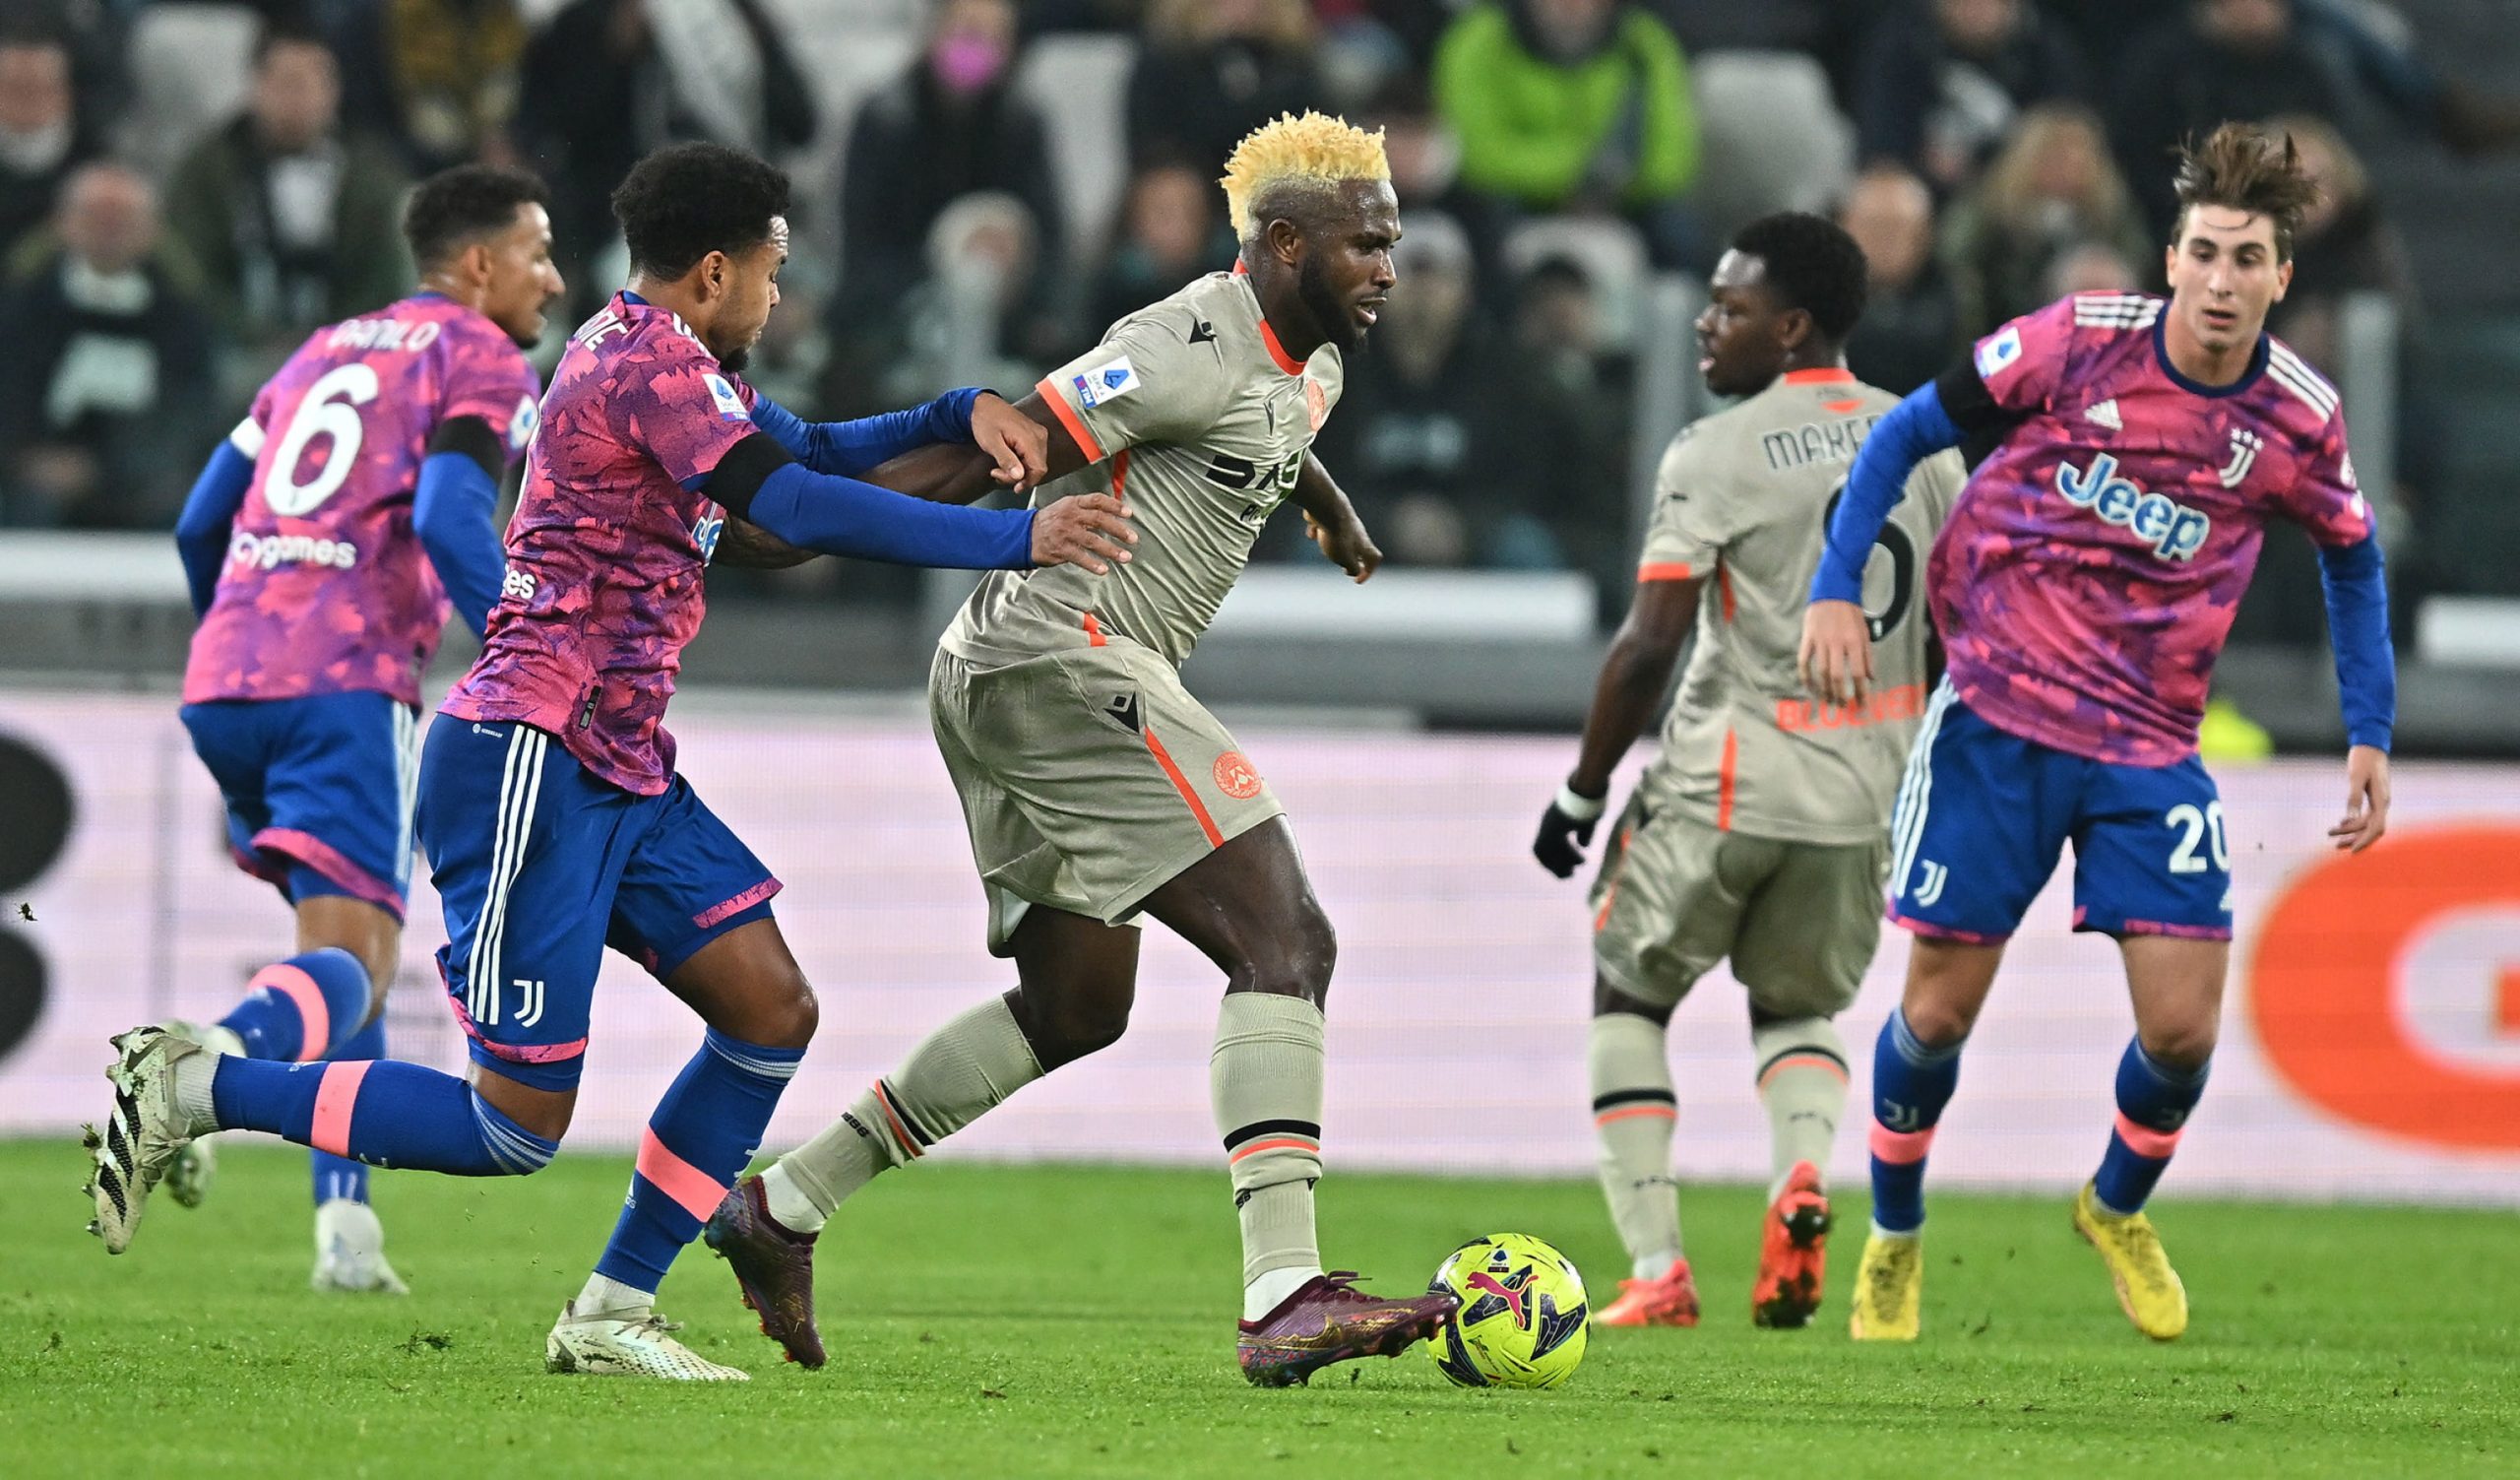 epa10394595 Juventus' Weston McKennie and Udinese's Isaac Success (C) in action during the Italian Serie A soccer match between Juventus and Udinese at Allianz Stadium in Turin, Italy, 07 January 2023.  EPA/ALESSANDRO DI MARCO